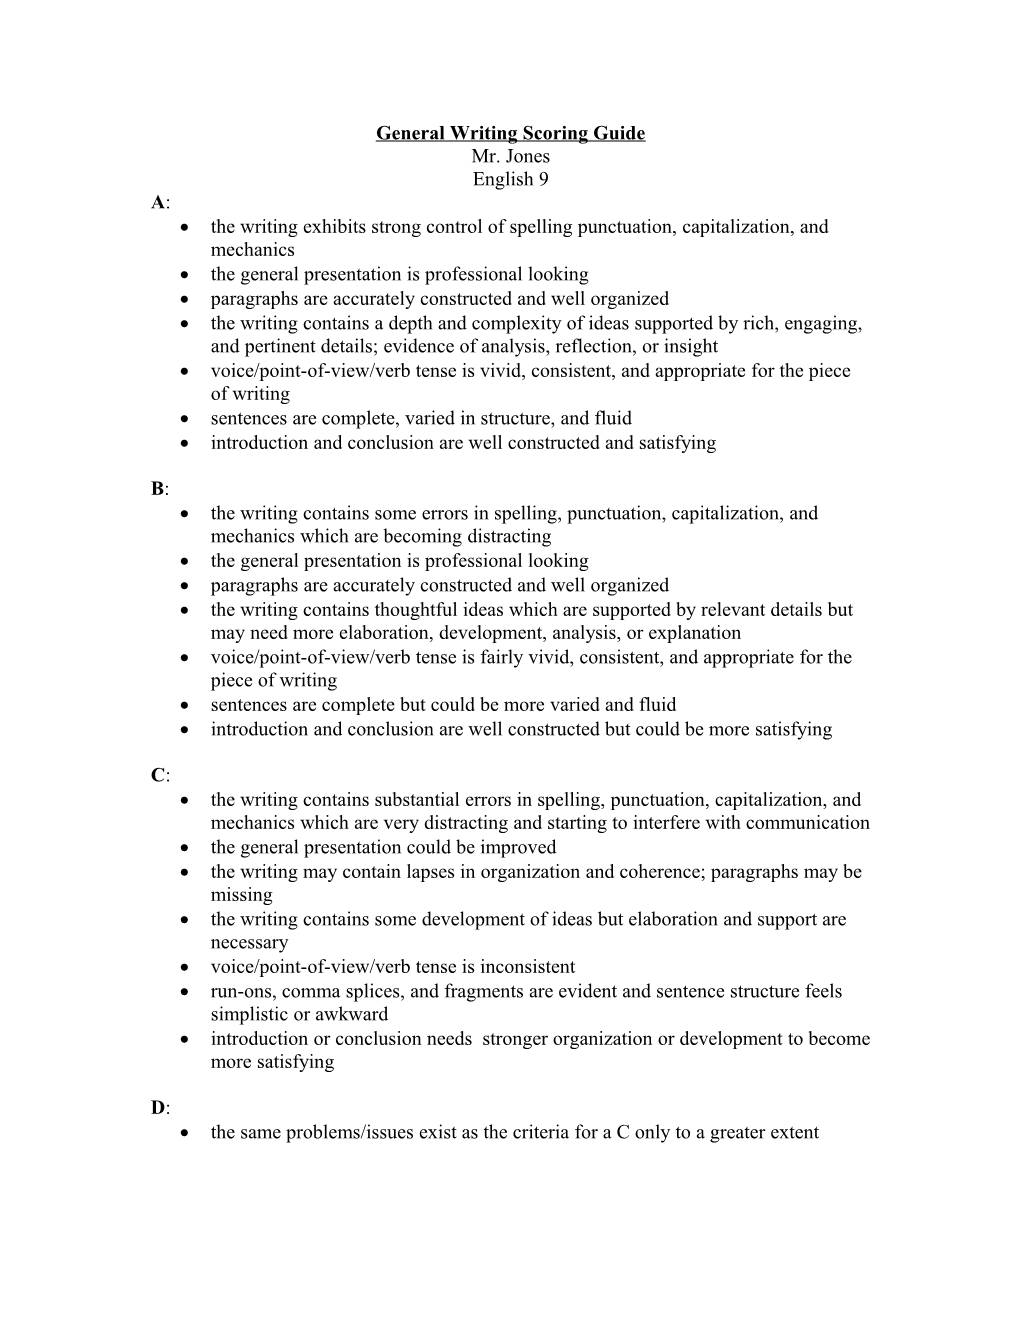 General Writing Evaluation Rubric